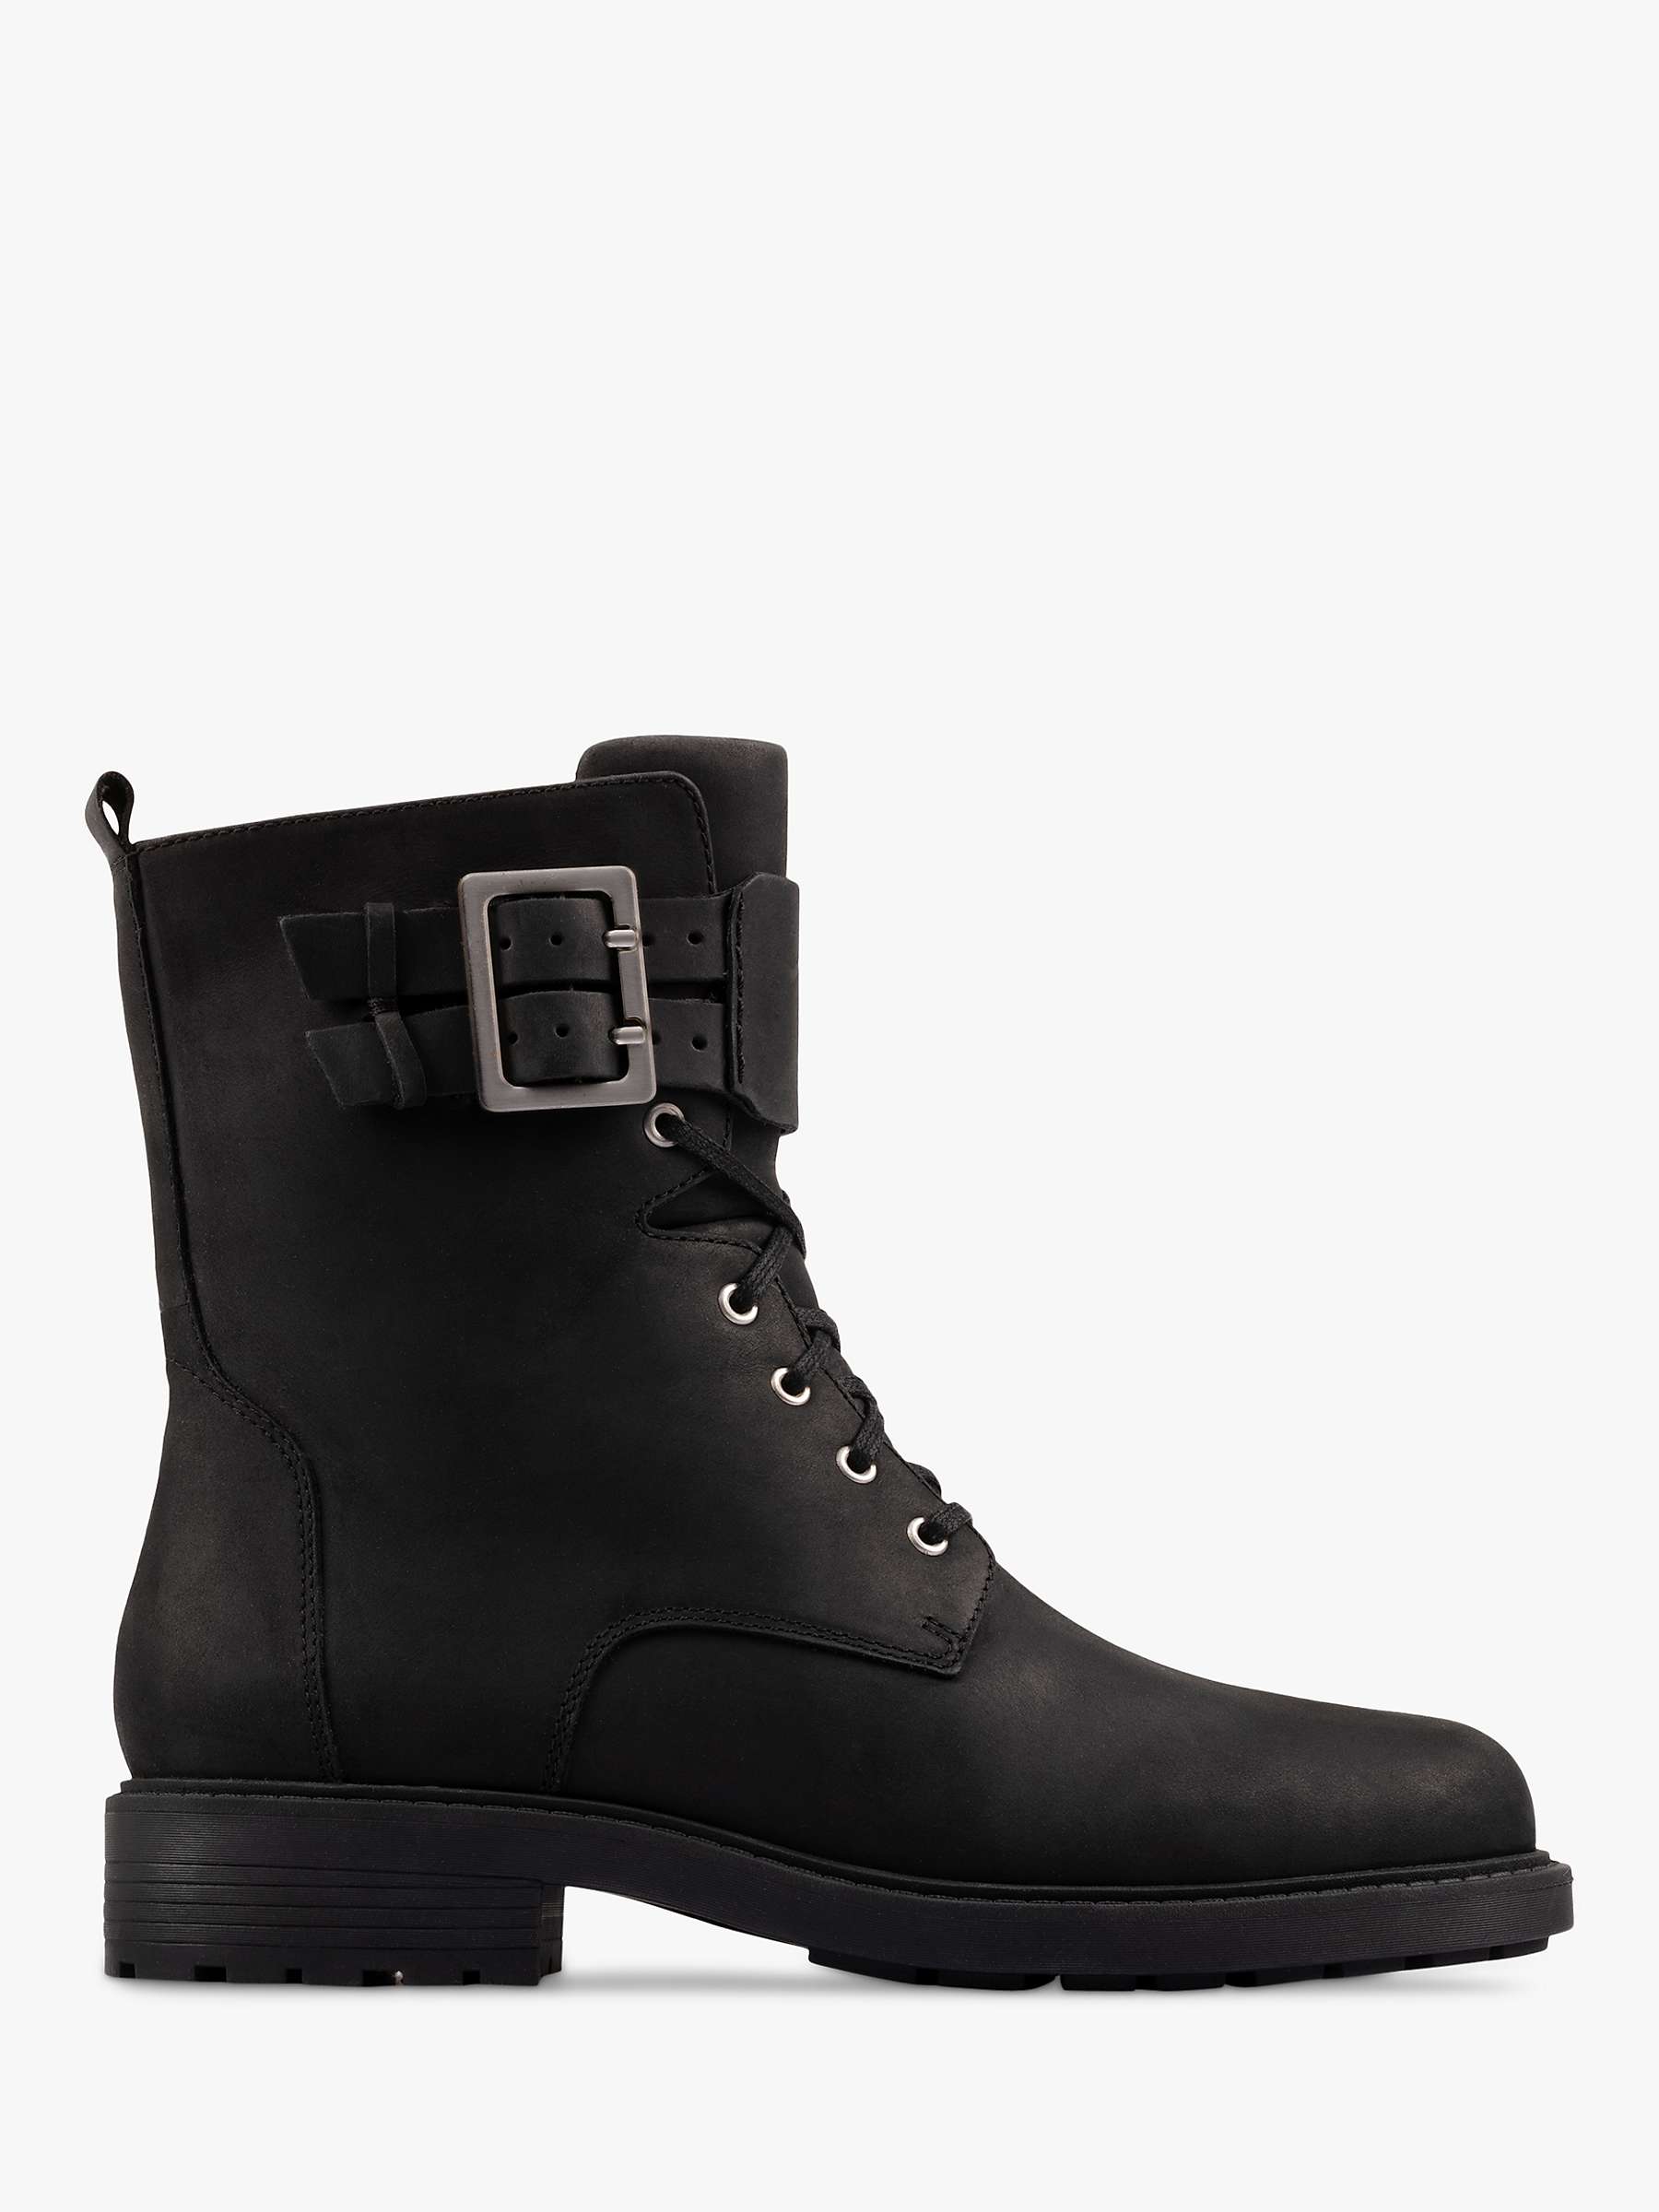 Buy Clarks Orinoco 2 Leather Wide Fit Lace Up Ankle Boots Online at johnlewis.com